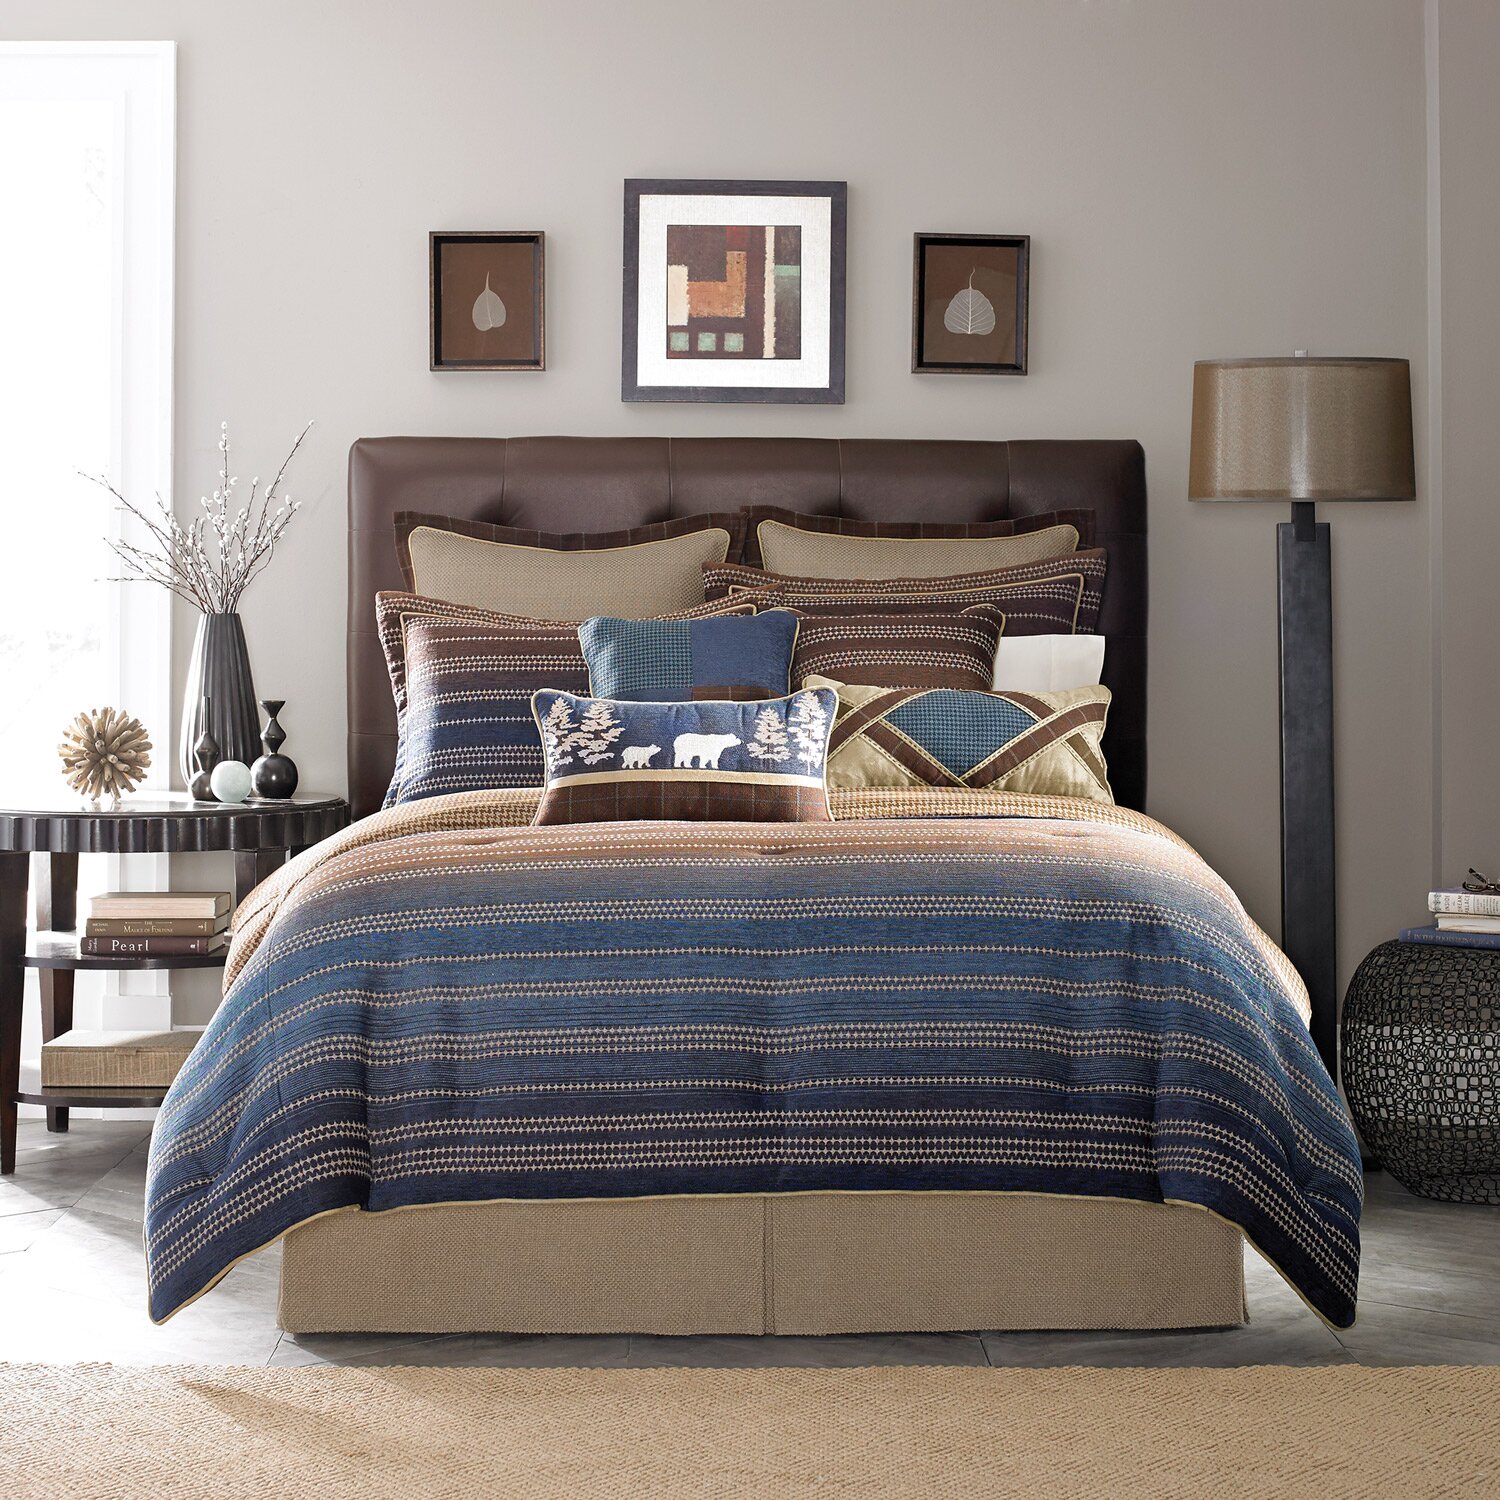 Croscill Clairmont 4 Piece Bedding Collection And Reviews Wayfair